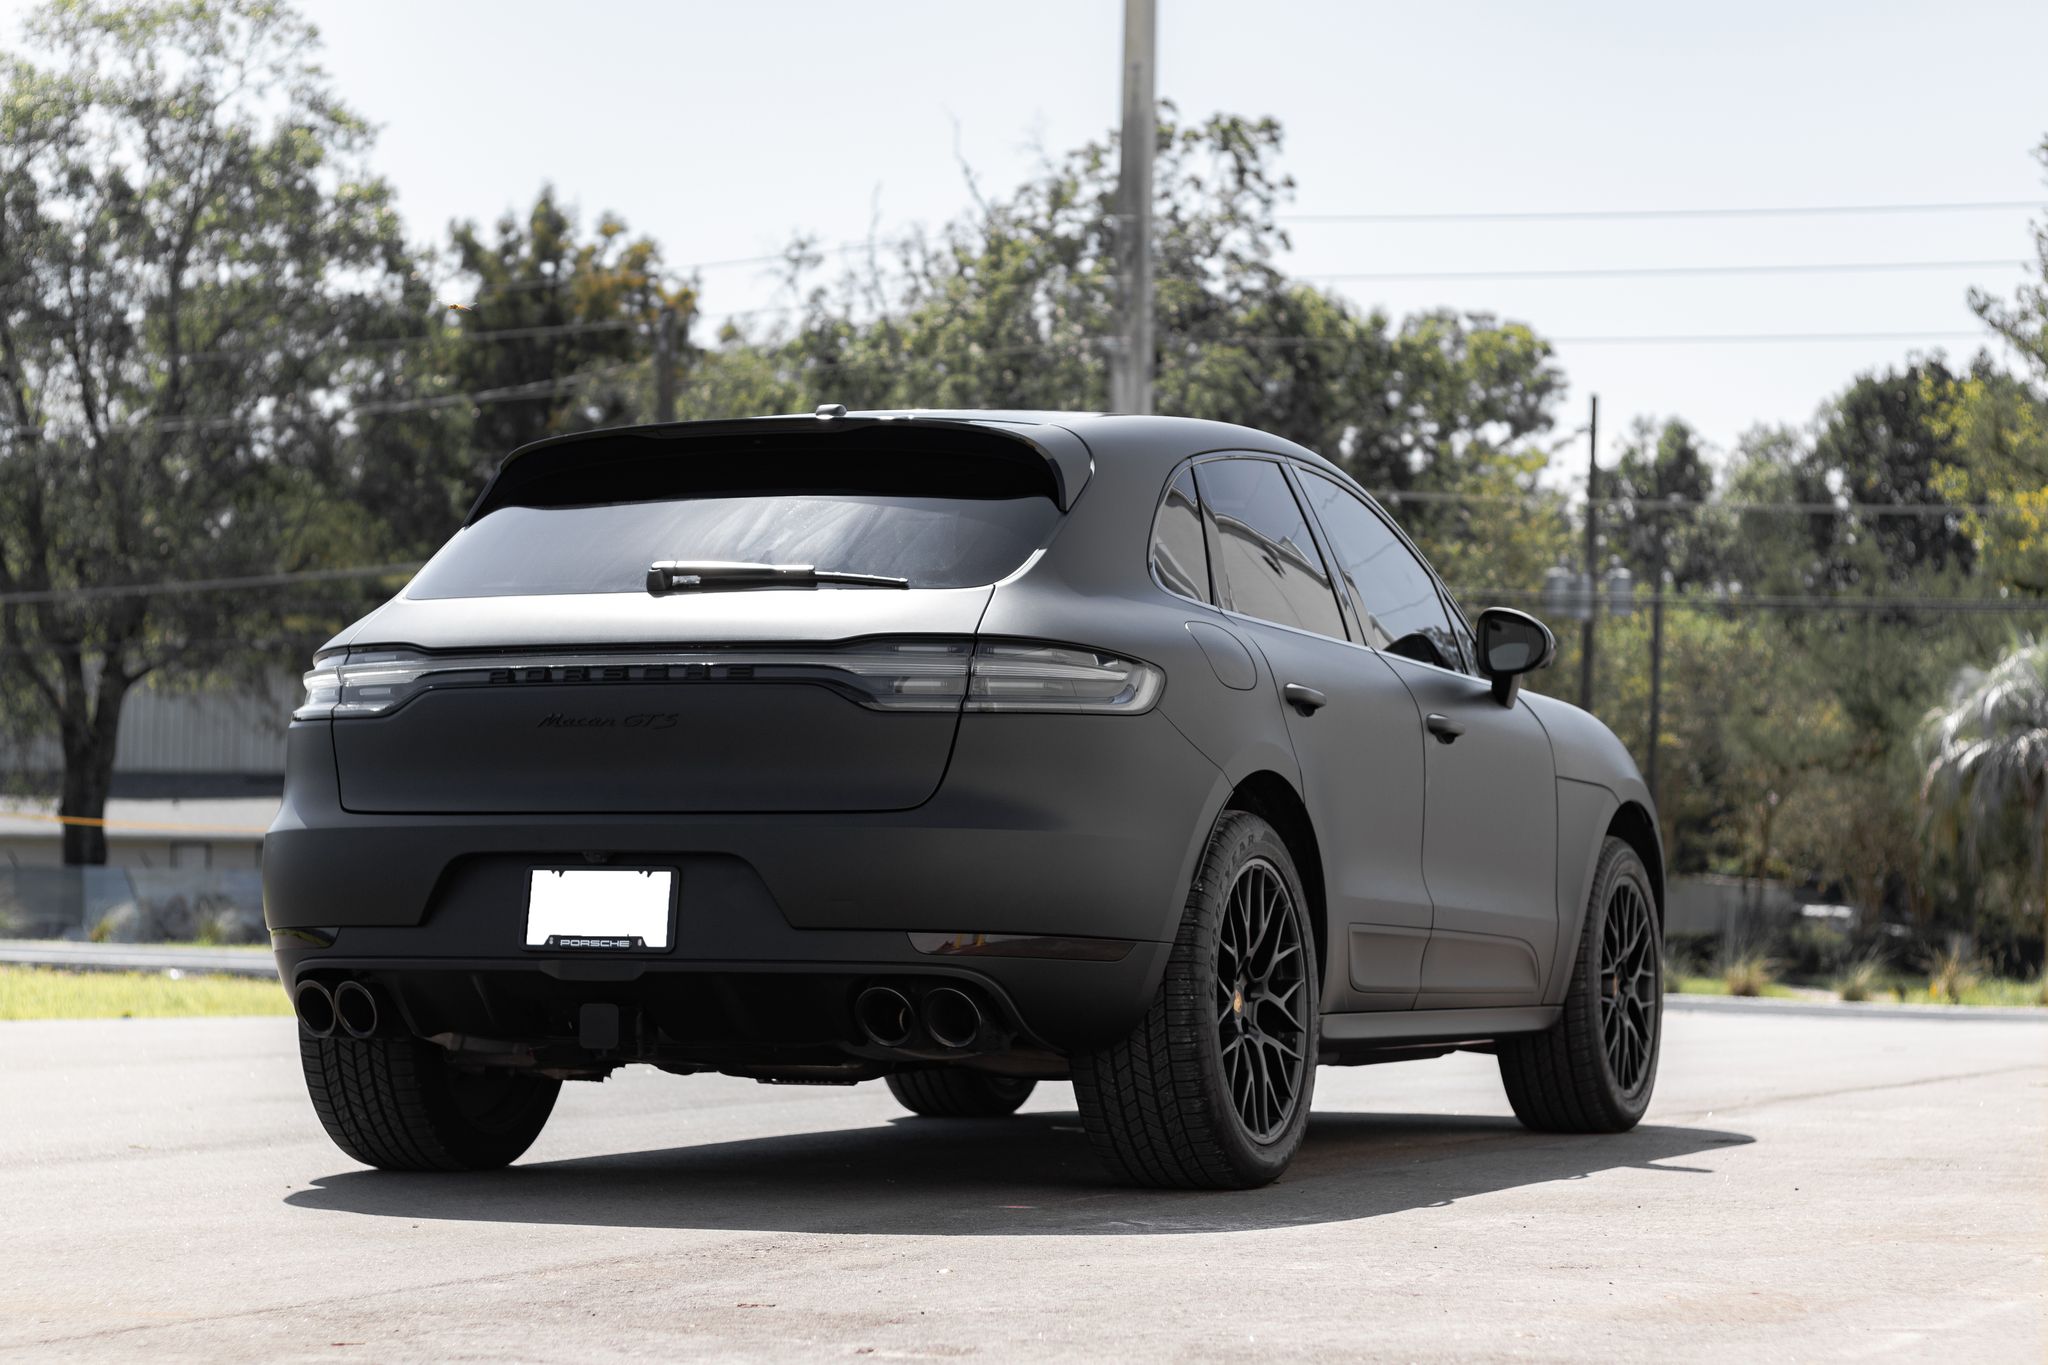 Back of a Porsche SUV car model wrapped in a flat matte black colored vinyl car wrap. Porsche Cayman with a flat "Matte Black" colored vinyl wrap applied by <a href="http://www.wrapsdirect.com">Wraps Direct</a> in Jacksonville Florida.